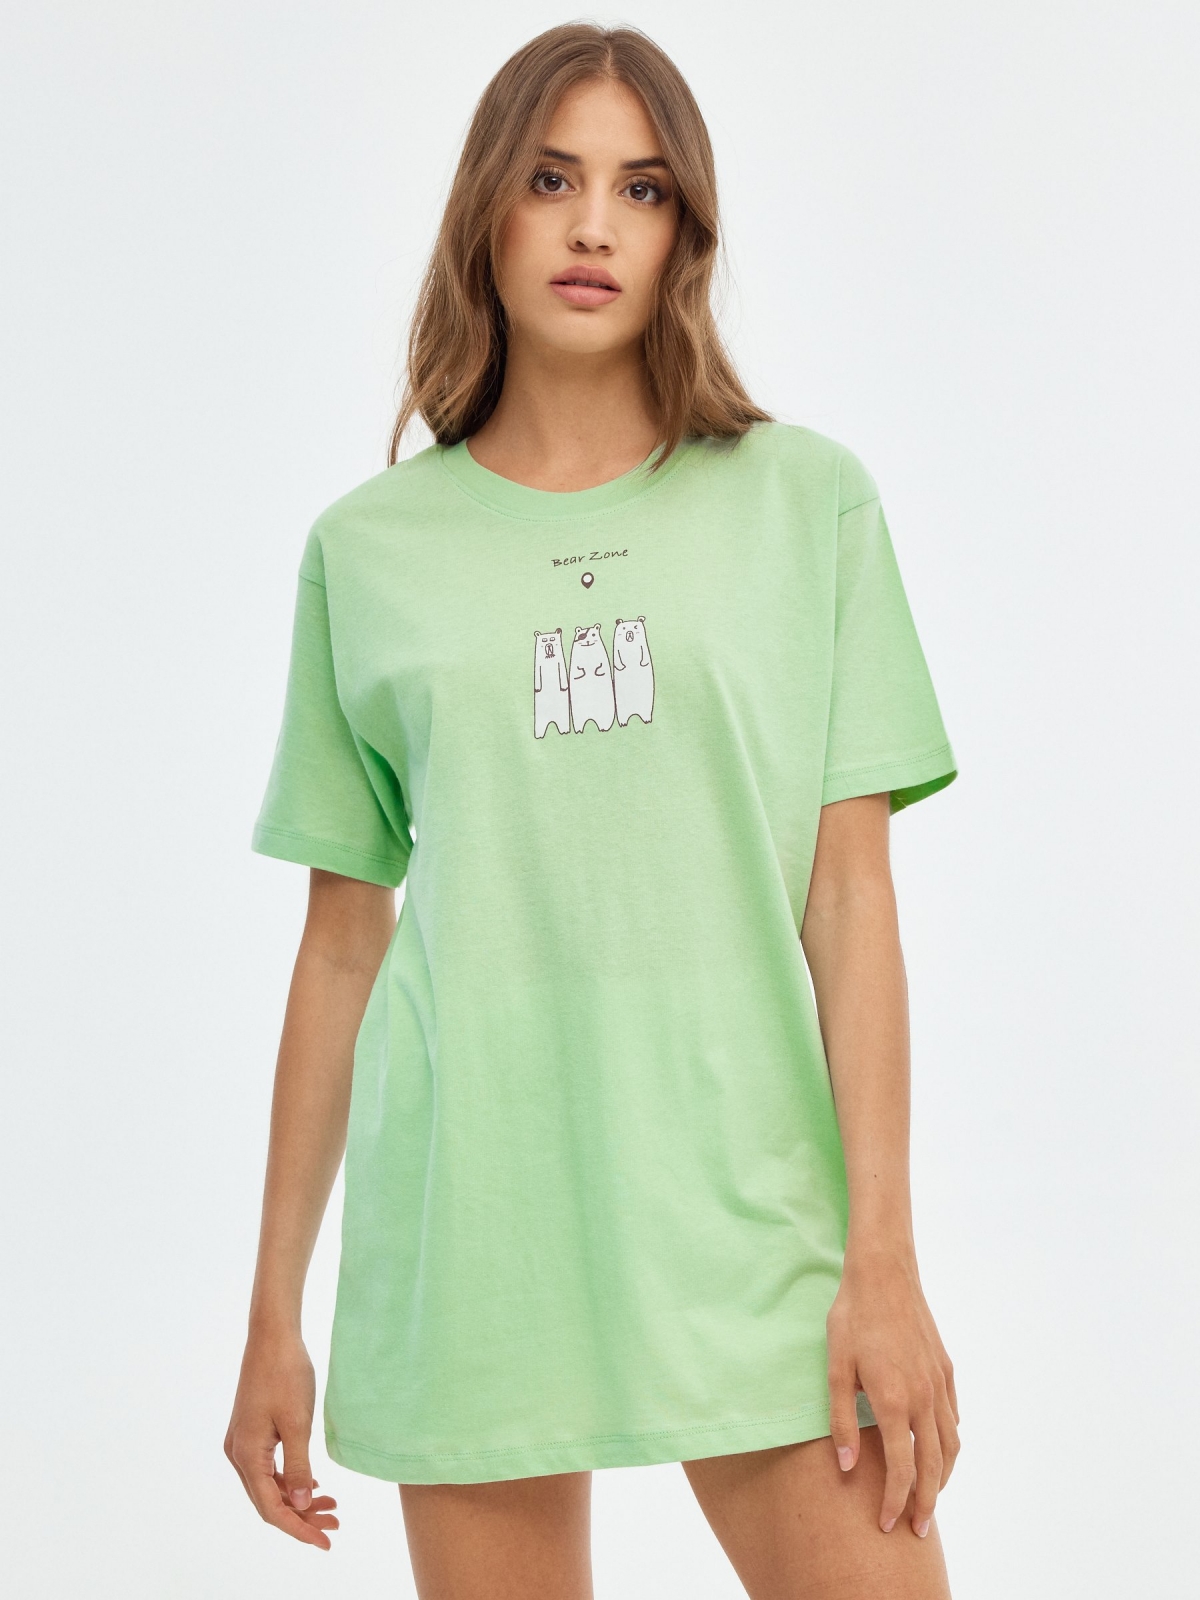 T-shirt oversized In Forest verde claro vista meia frontal